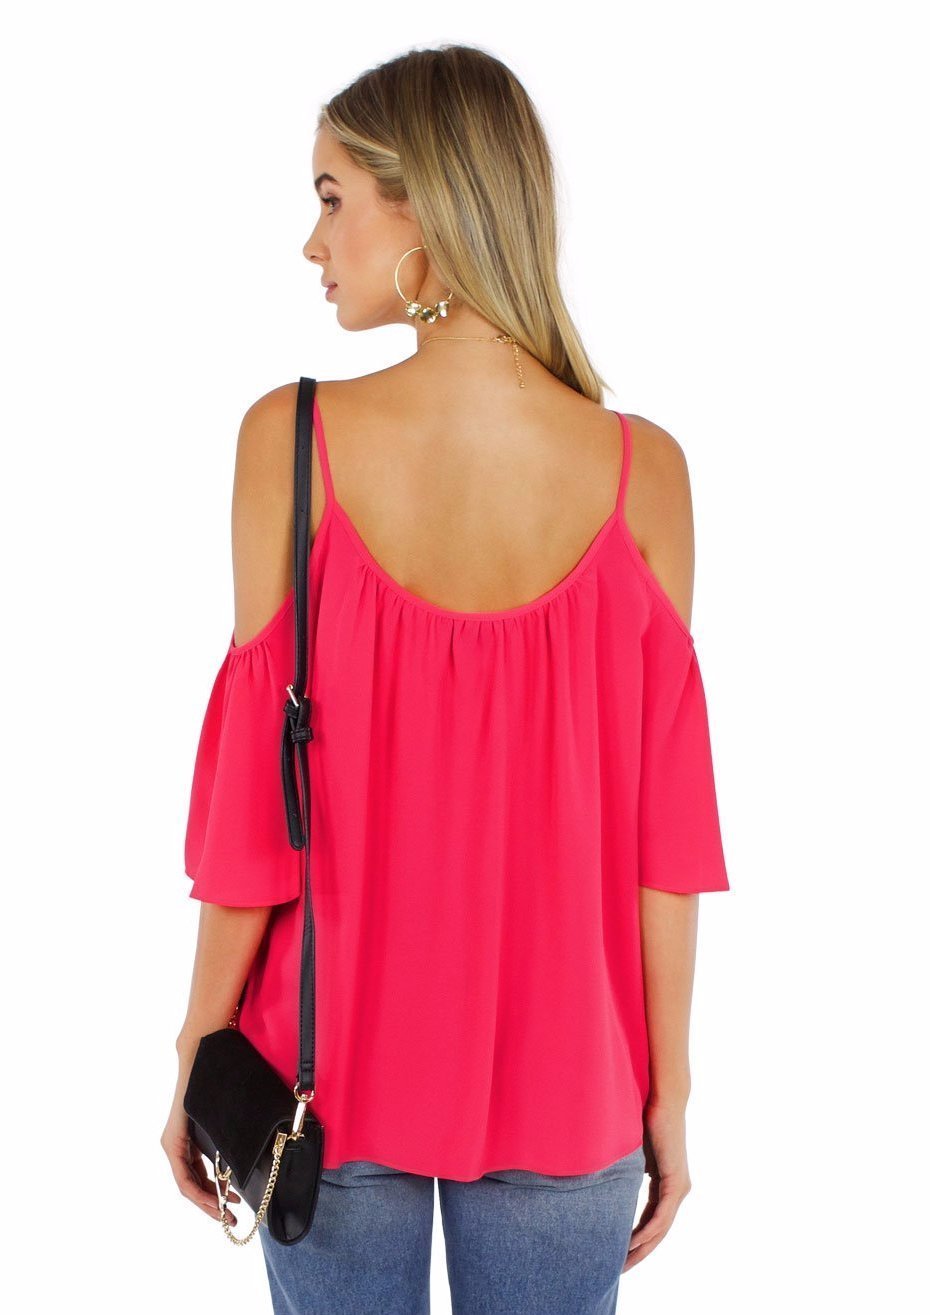 Women wearing a top rental from French Connection called Crepe Light Cut Out Shoulder Top